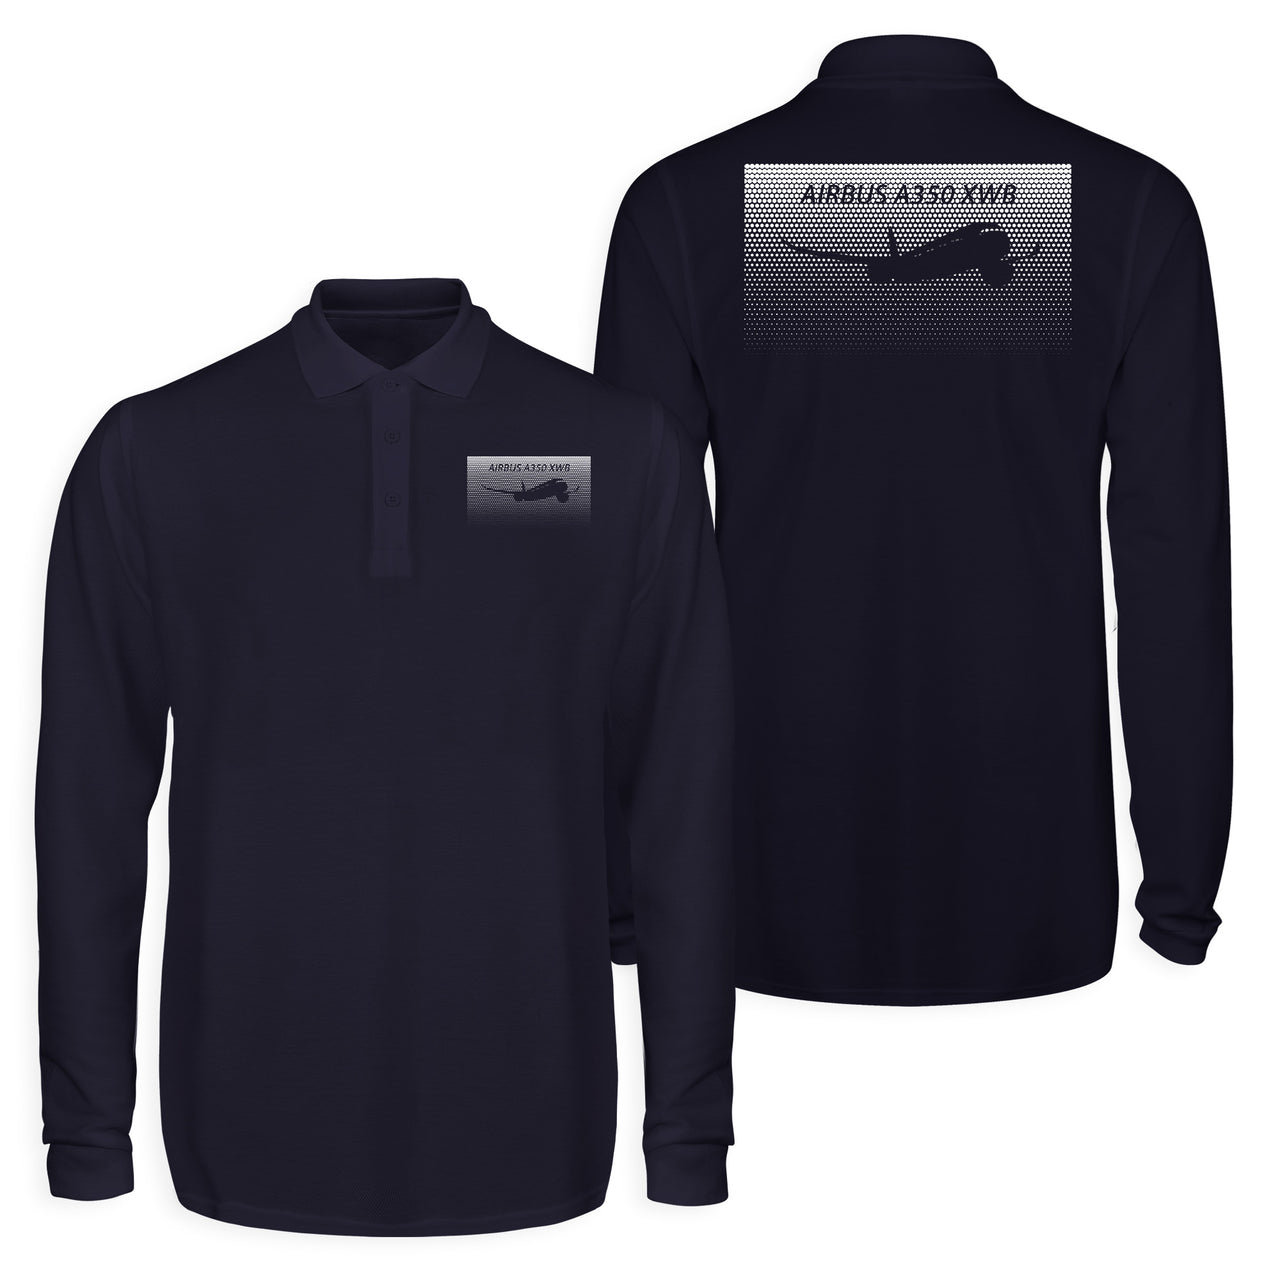 Airbus A350XWB & Dots Designed Long Sleeve Polo T-Shirts (Double-Side)